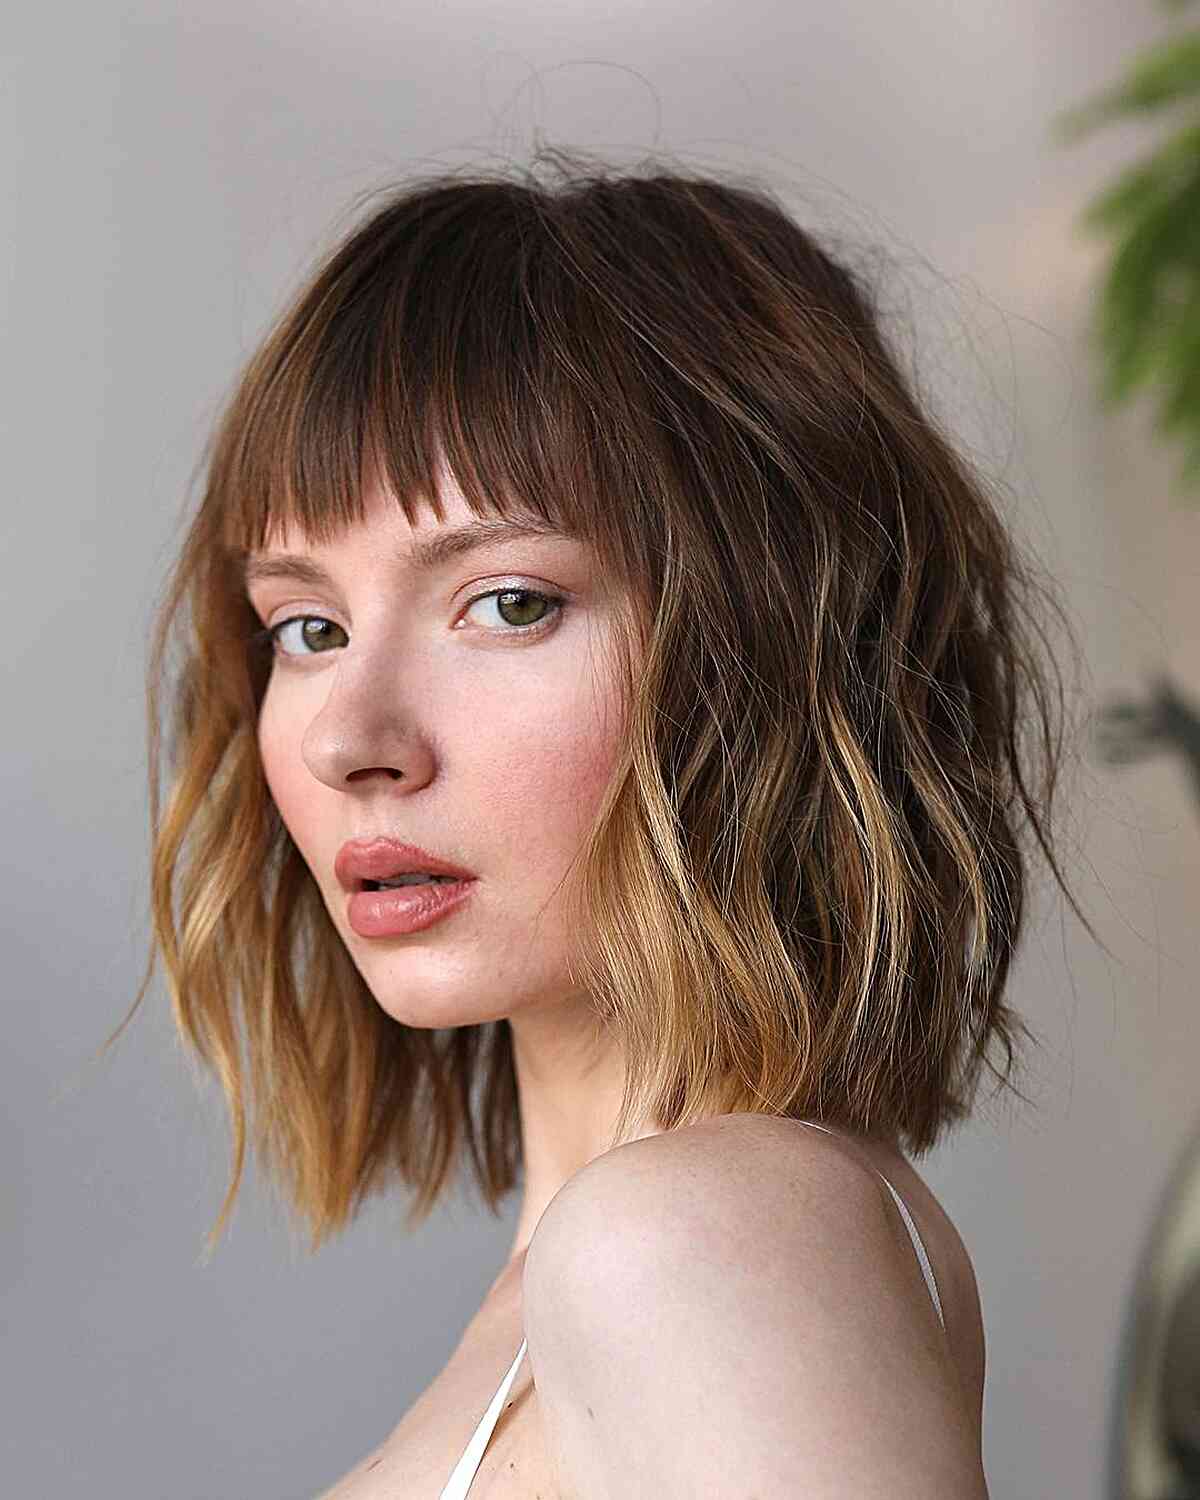 Shoulder-Length Crop with Choppy Shorter Bangs for girls with messy hair